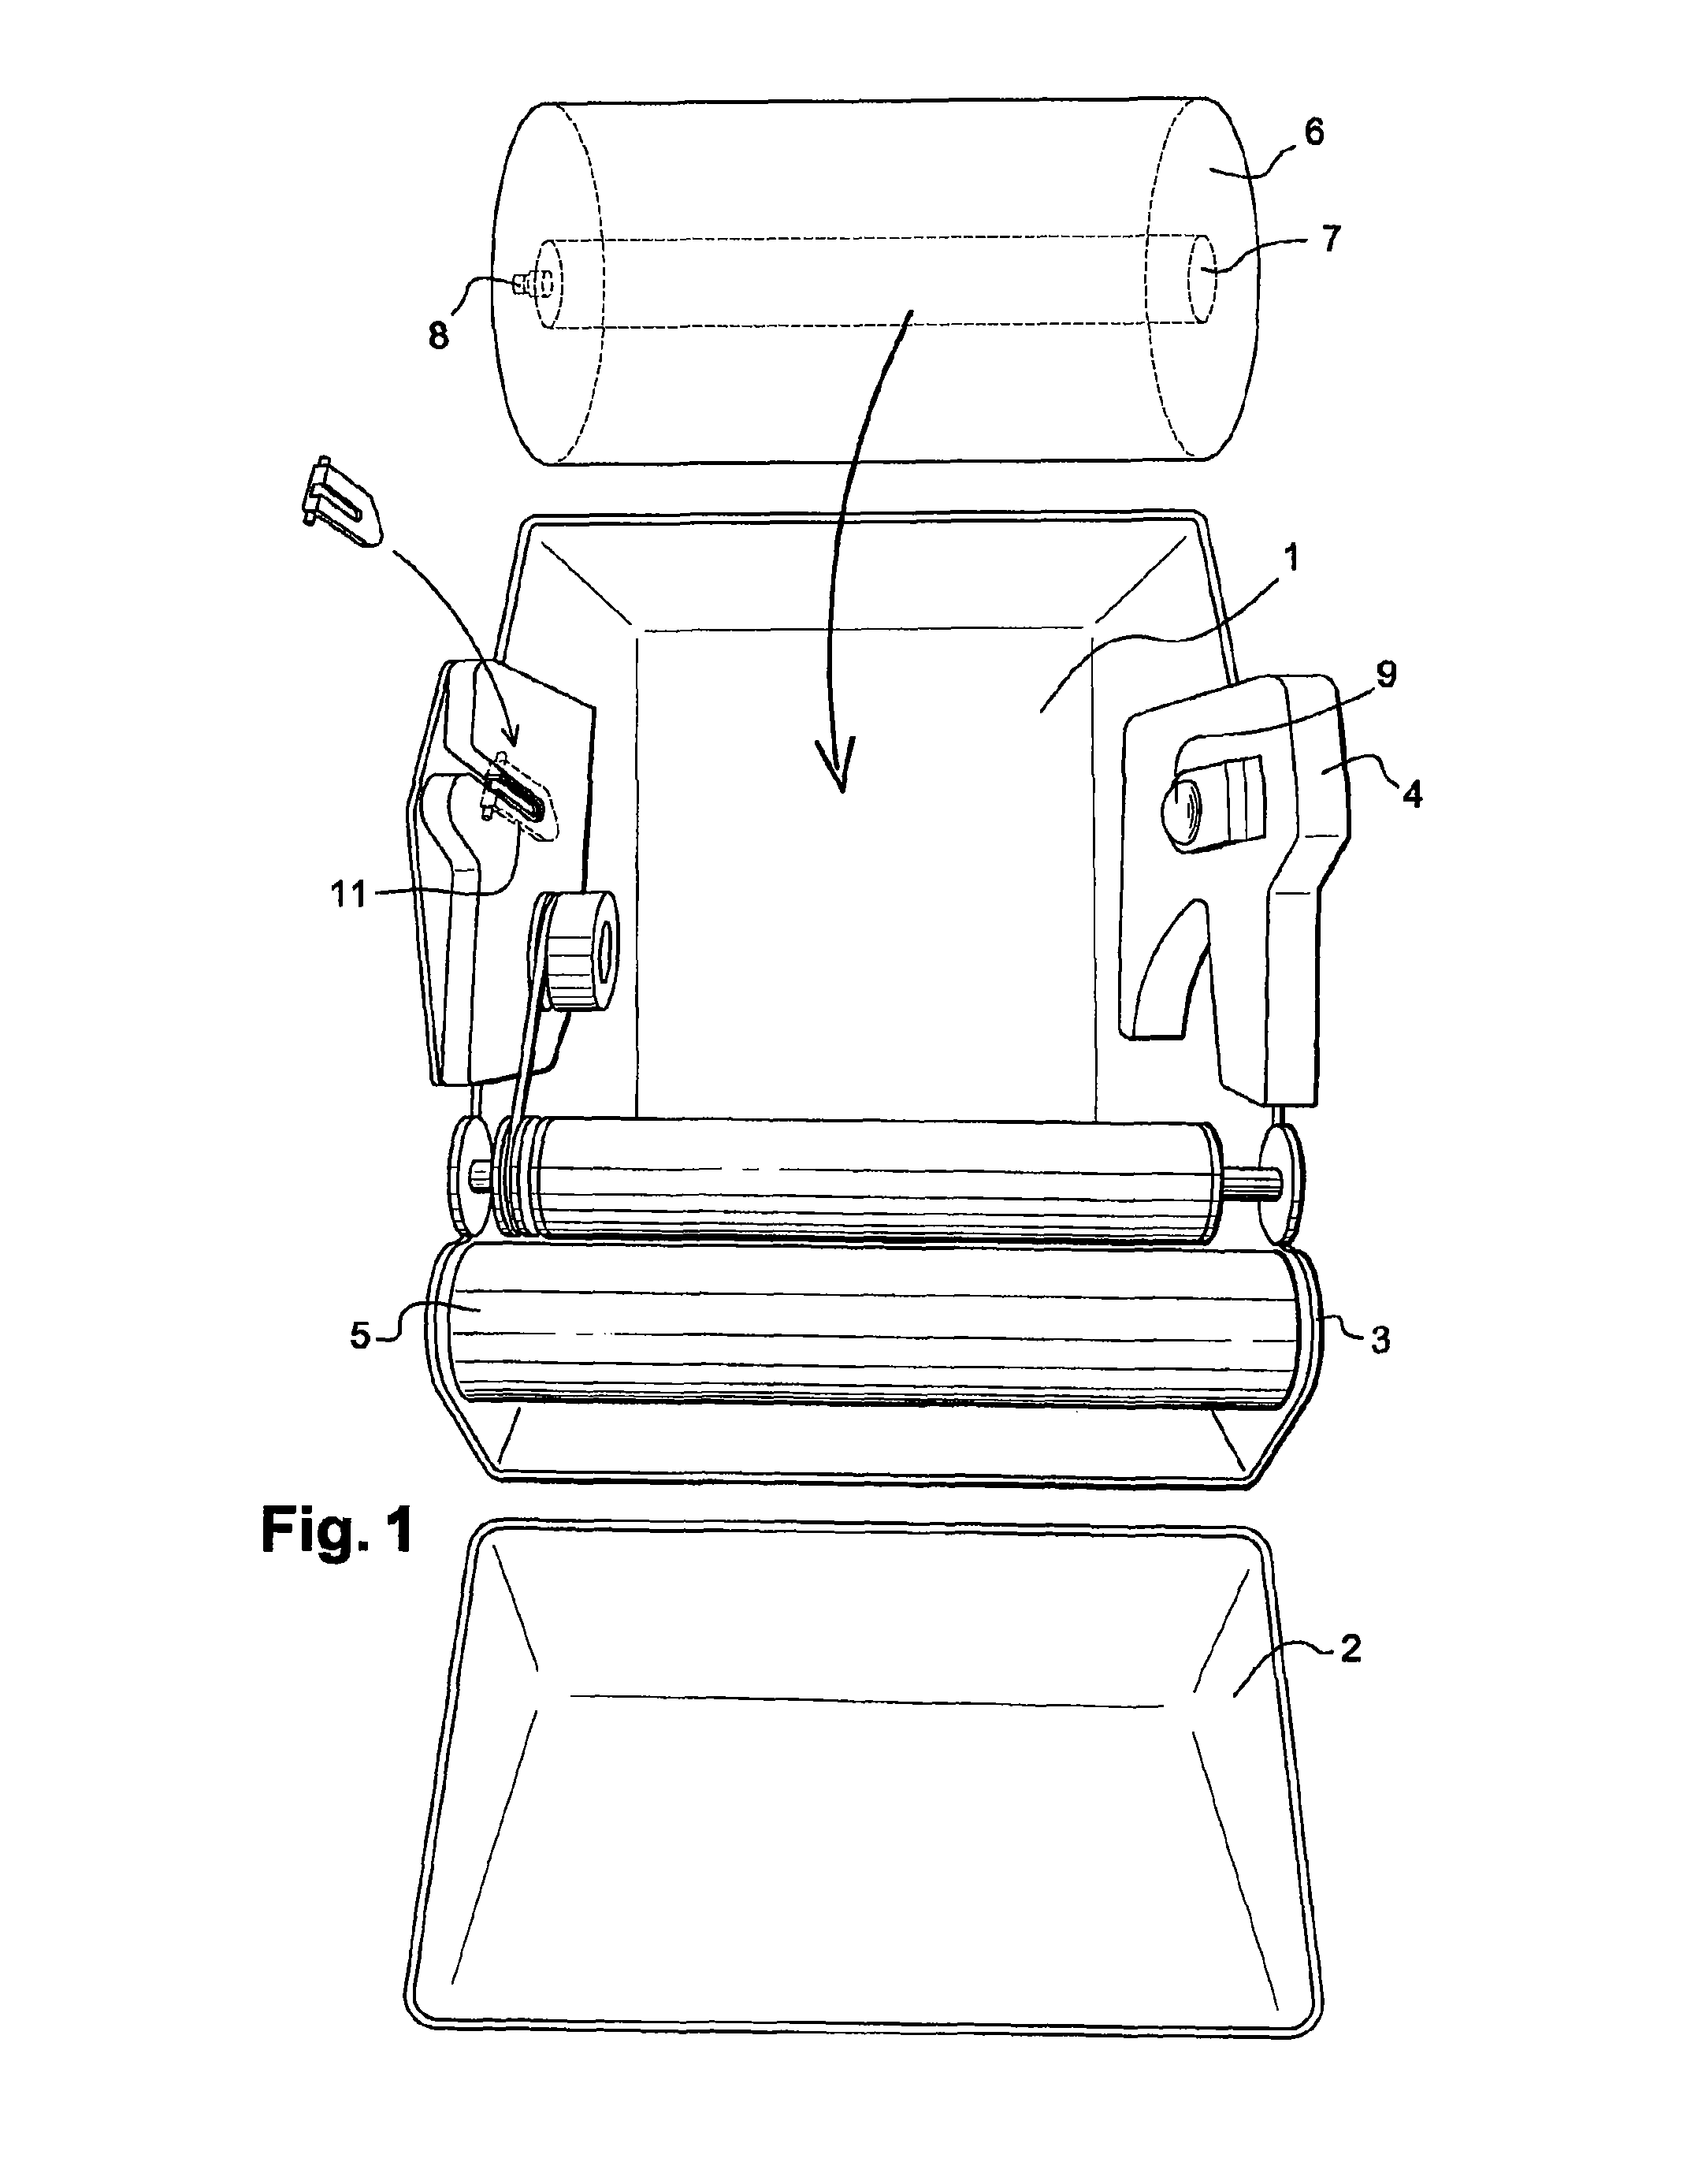 Disposable end piece for a roll of wiping material and apparatus for dispensing wiping material using one such end piece